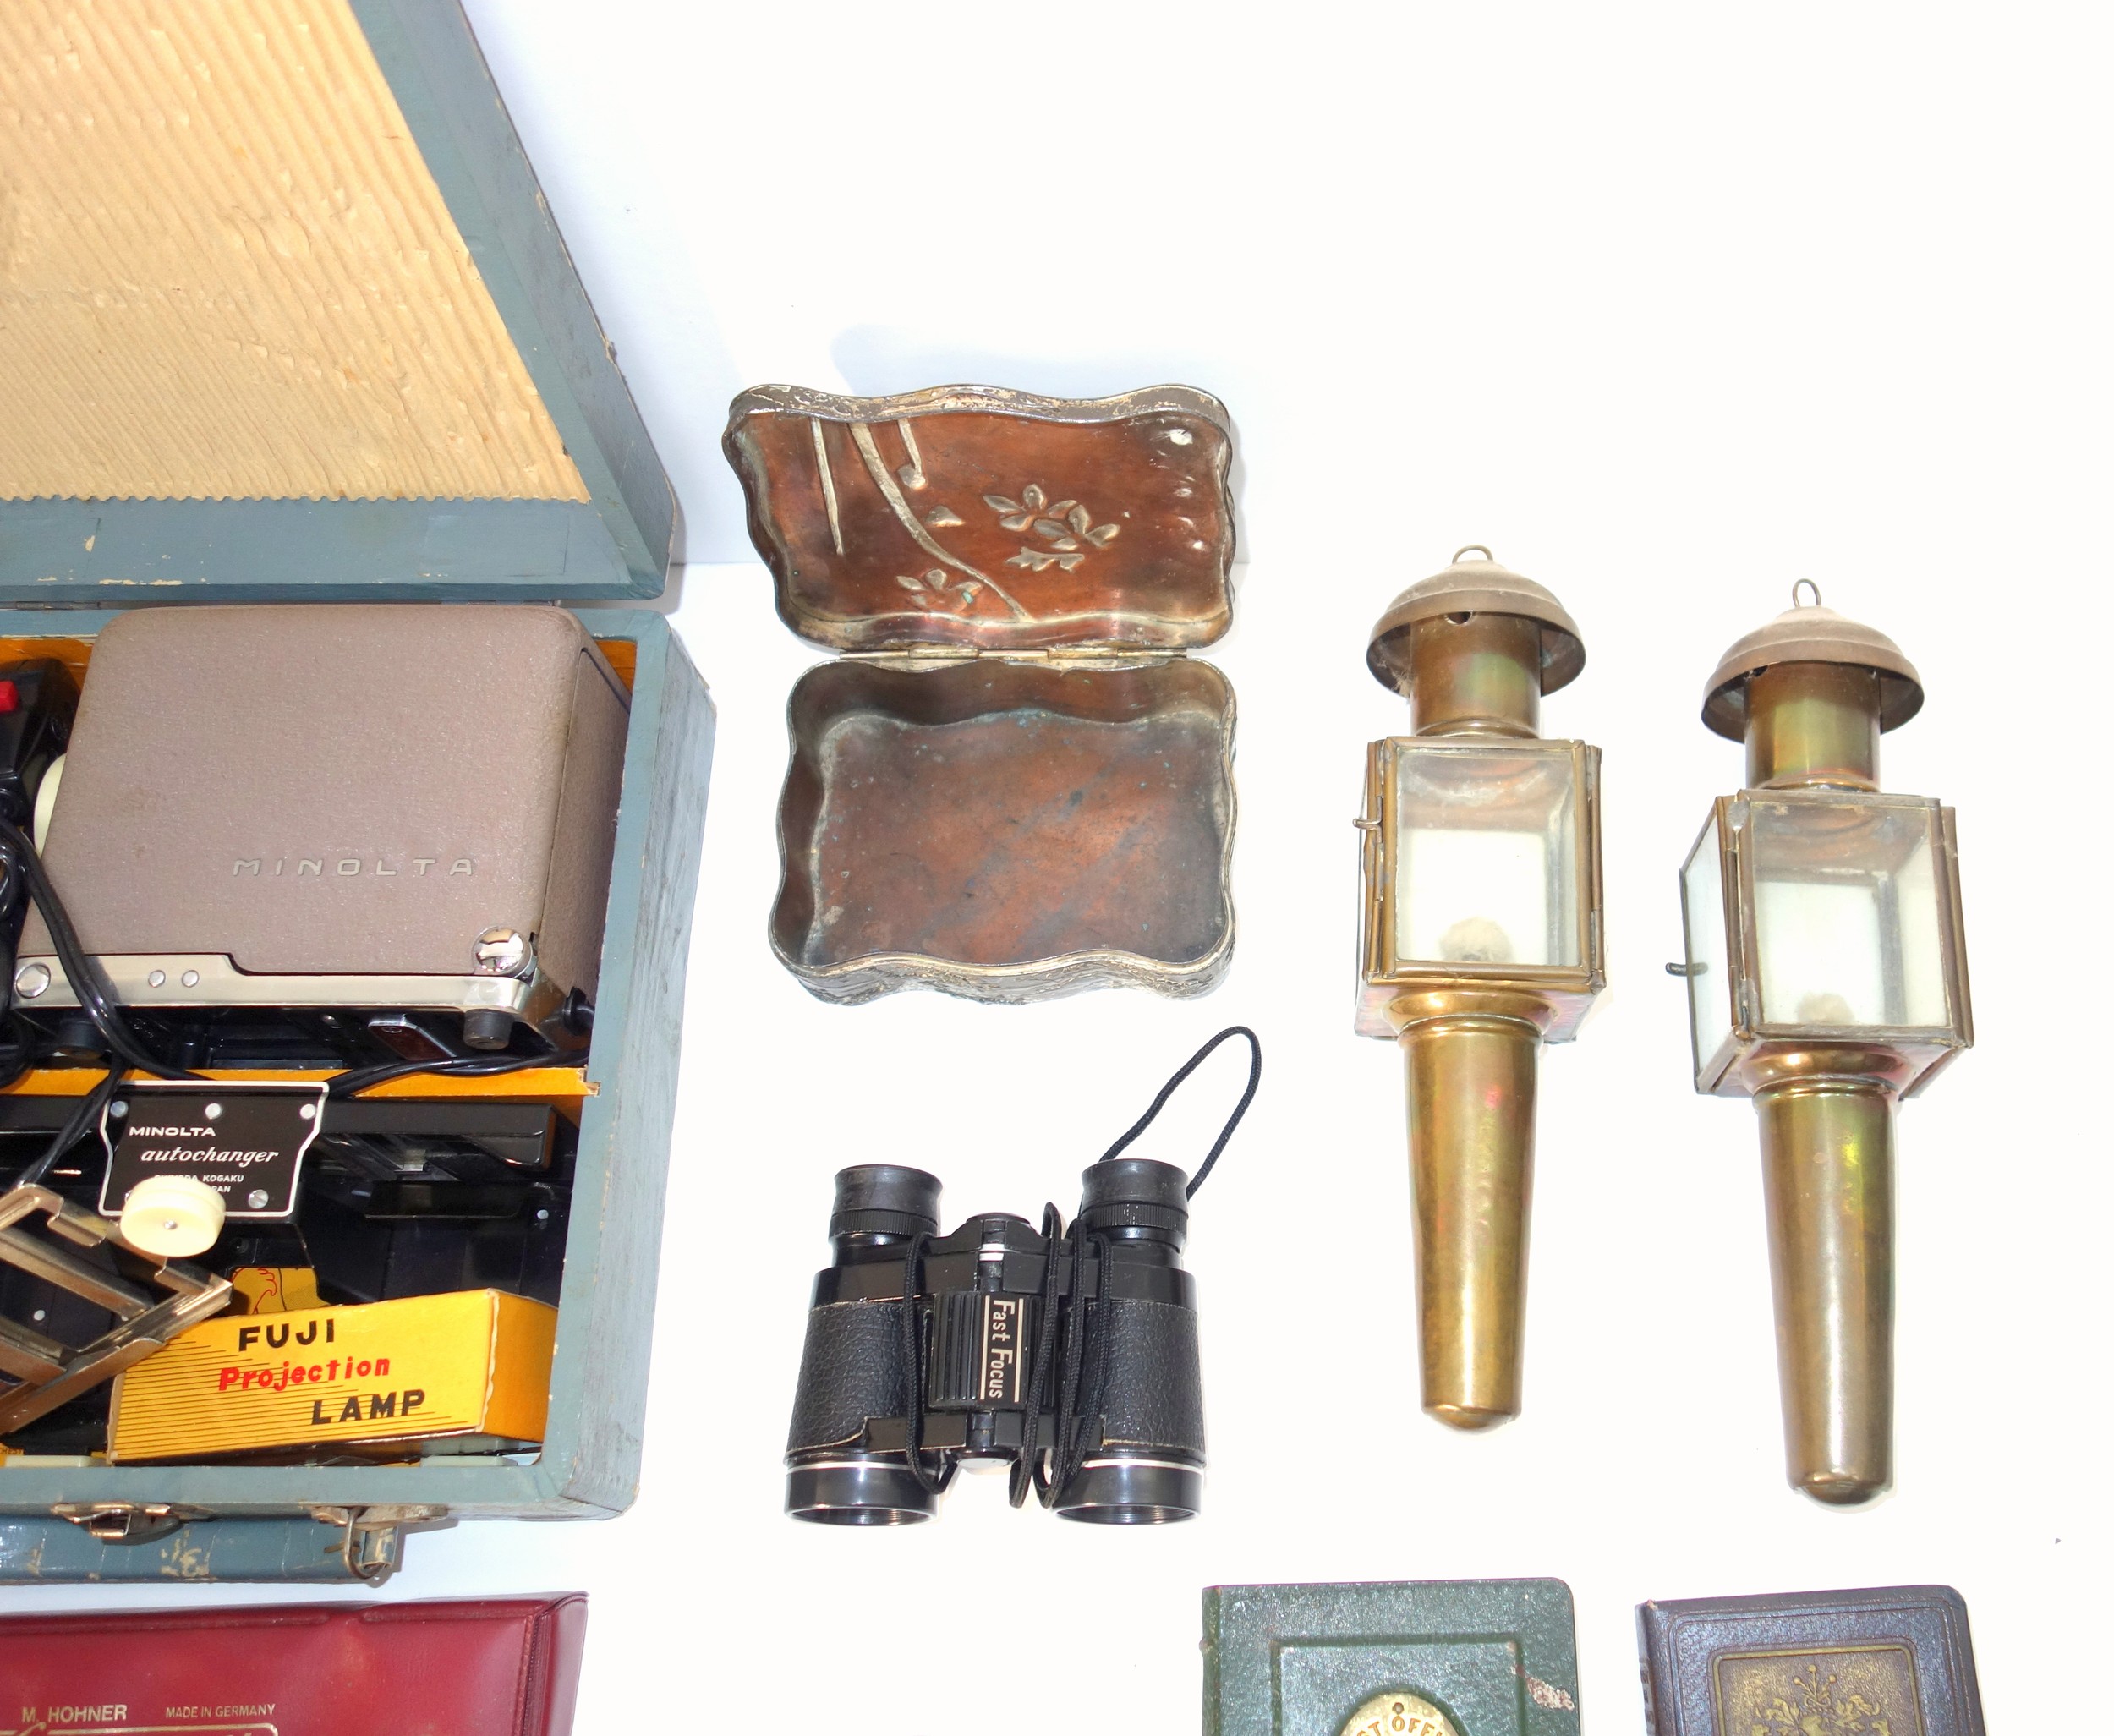 Stereoscope viewer with 3 slides, miniature Singer Sewing machine, Minolta Mini Slide Projector Kit, - Image 2 of 11